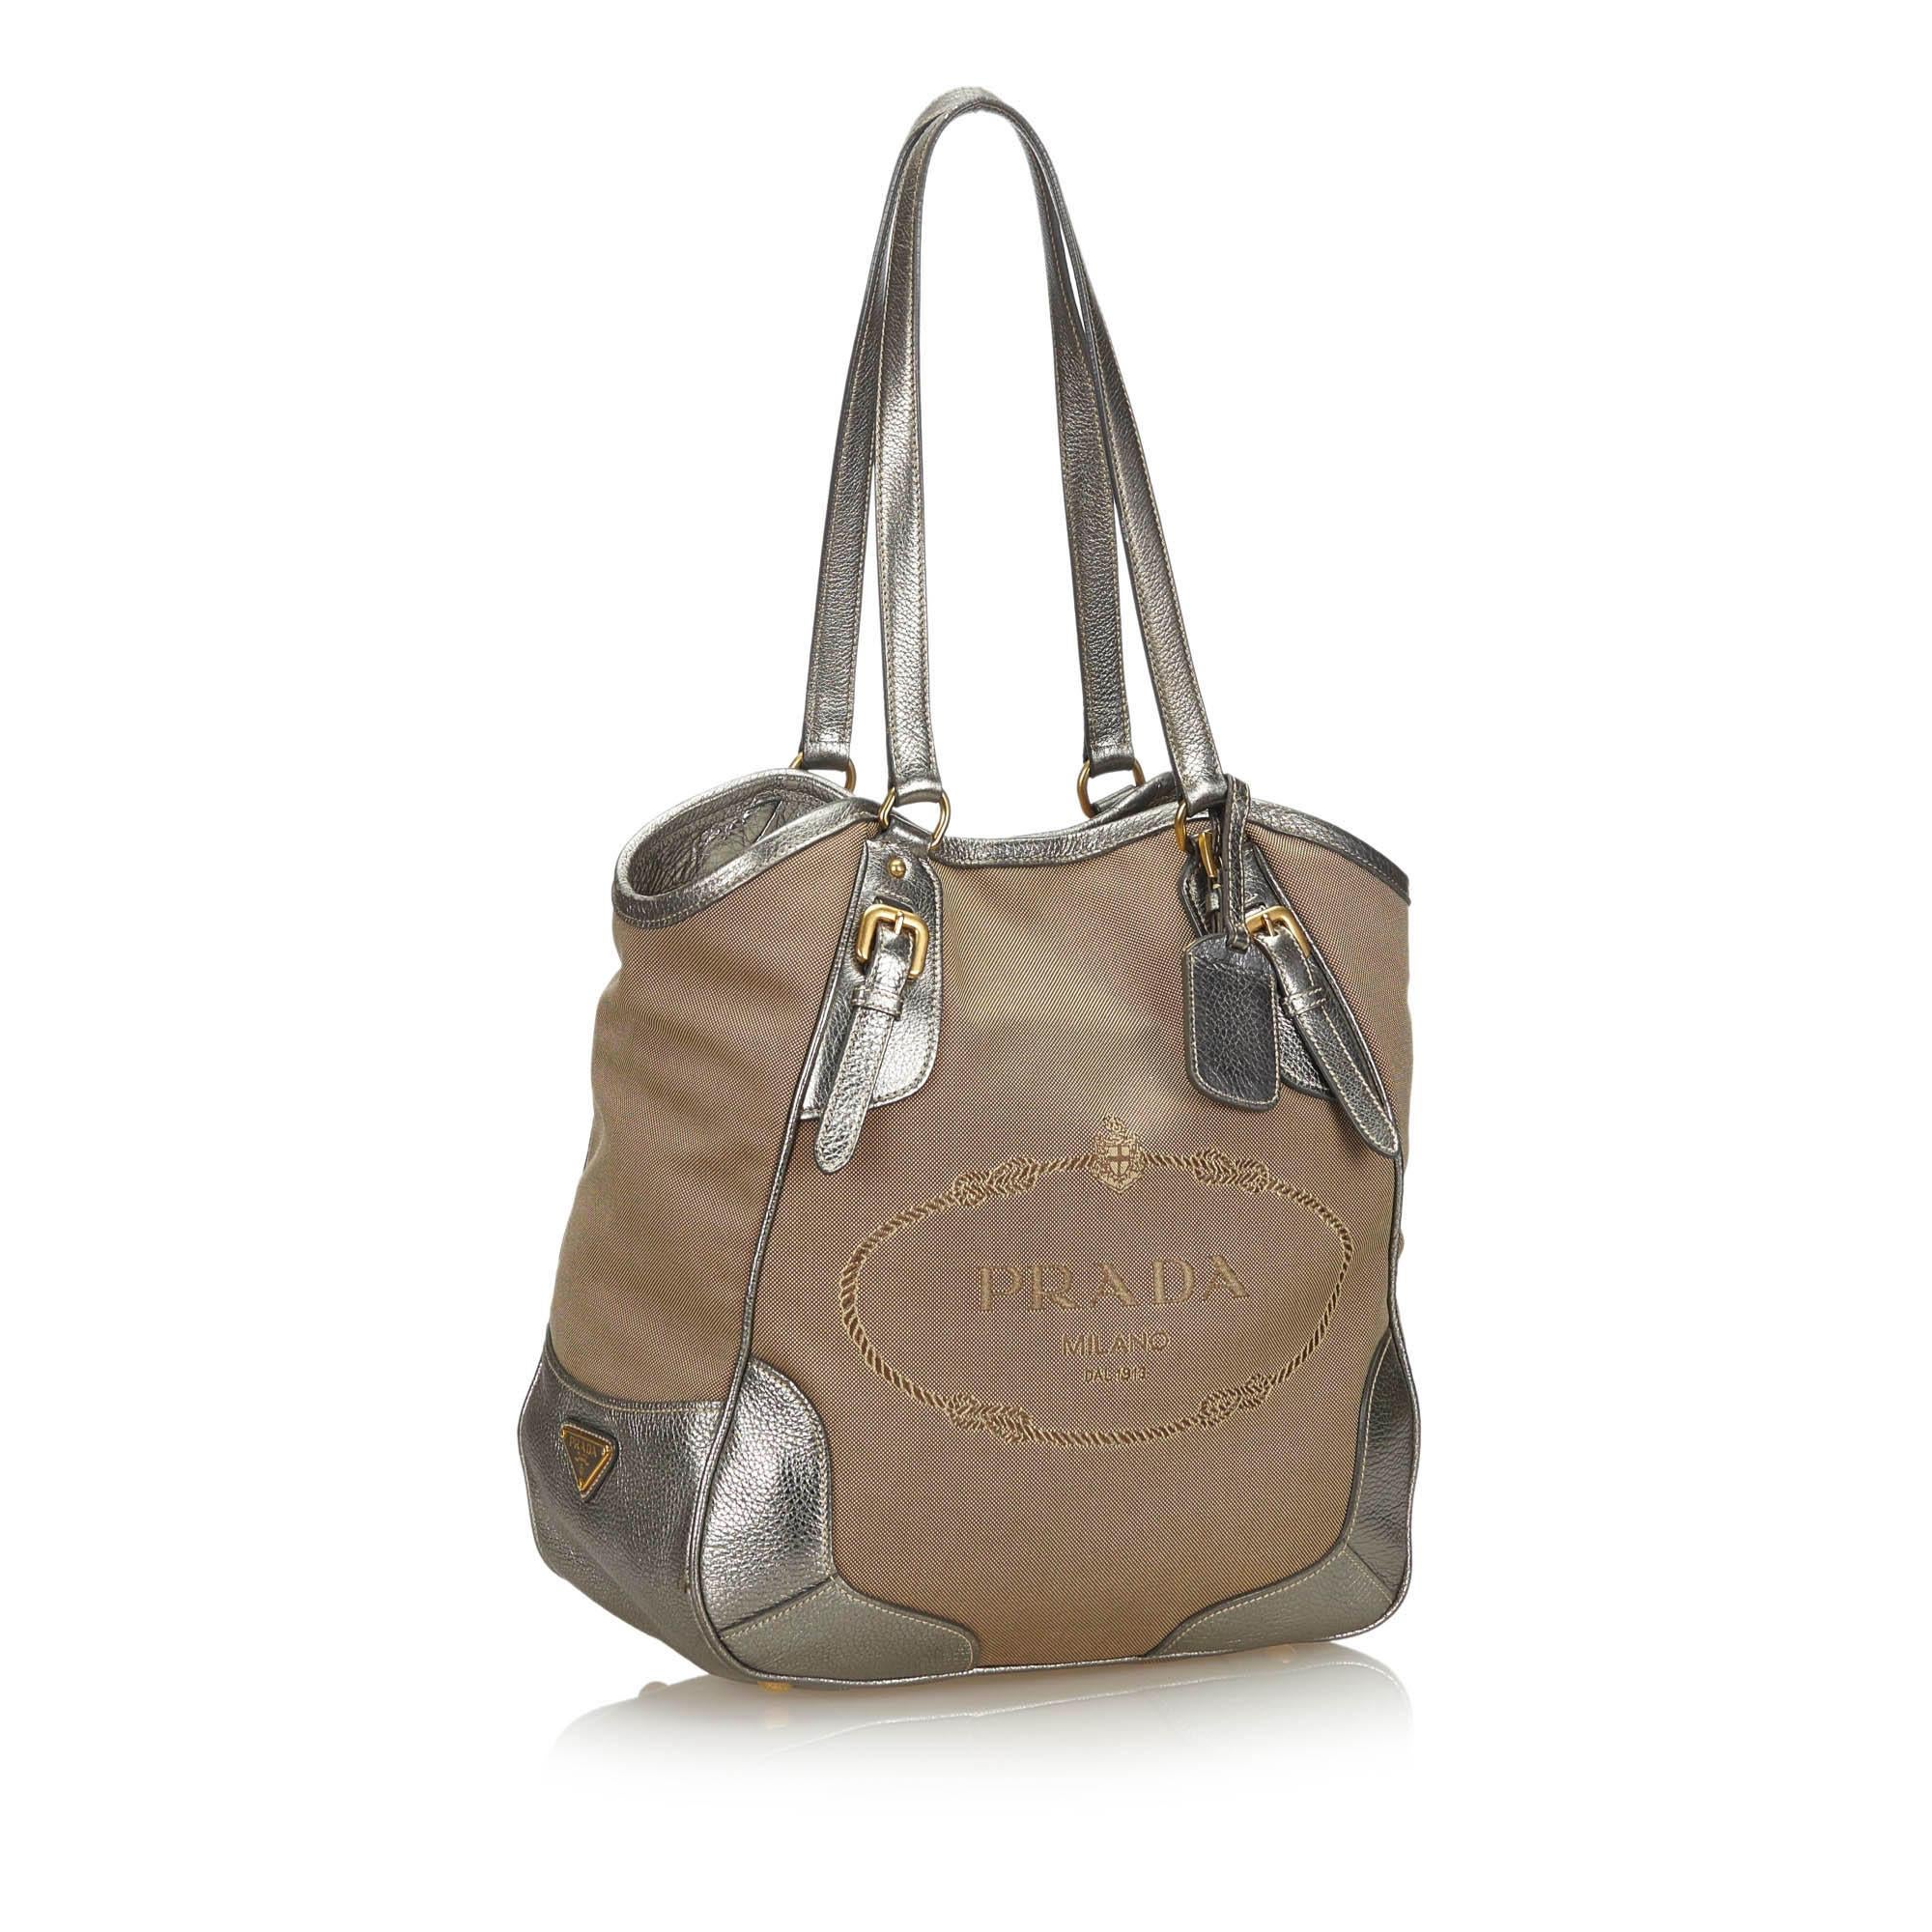 This tote bag features a canvas body with leather trim, flat leather straps, an open top with magnetic snap closure, and interior zip and slip pockets. It carries as AB condition rating.

Inclusions: 
Dust Bag

Dimensions:
Length: 34.00 cm
Width: